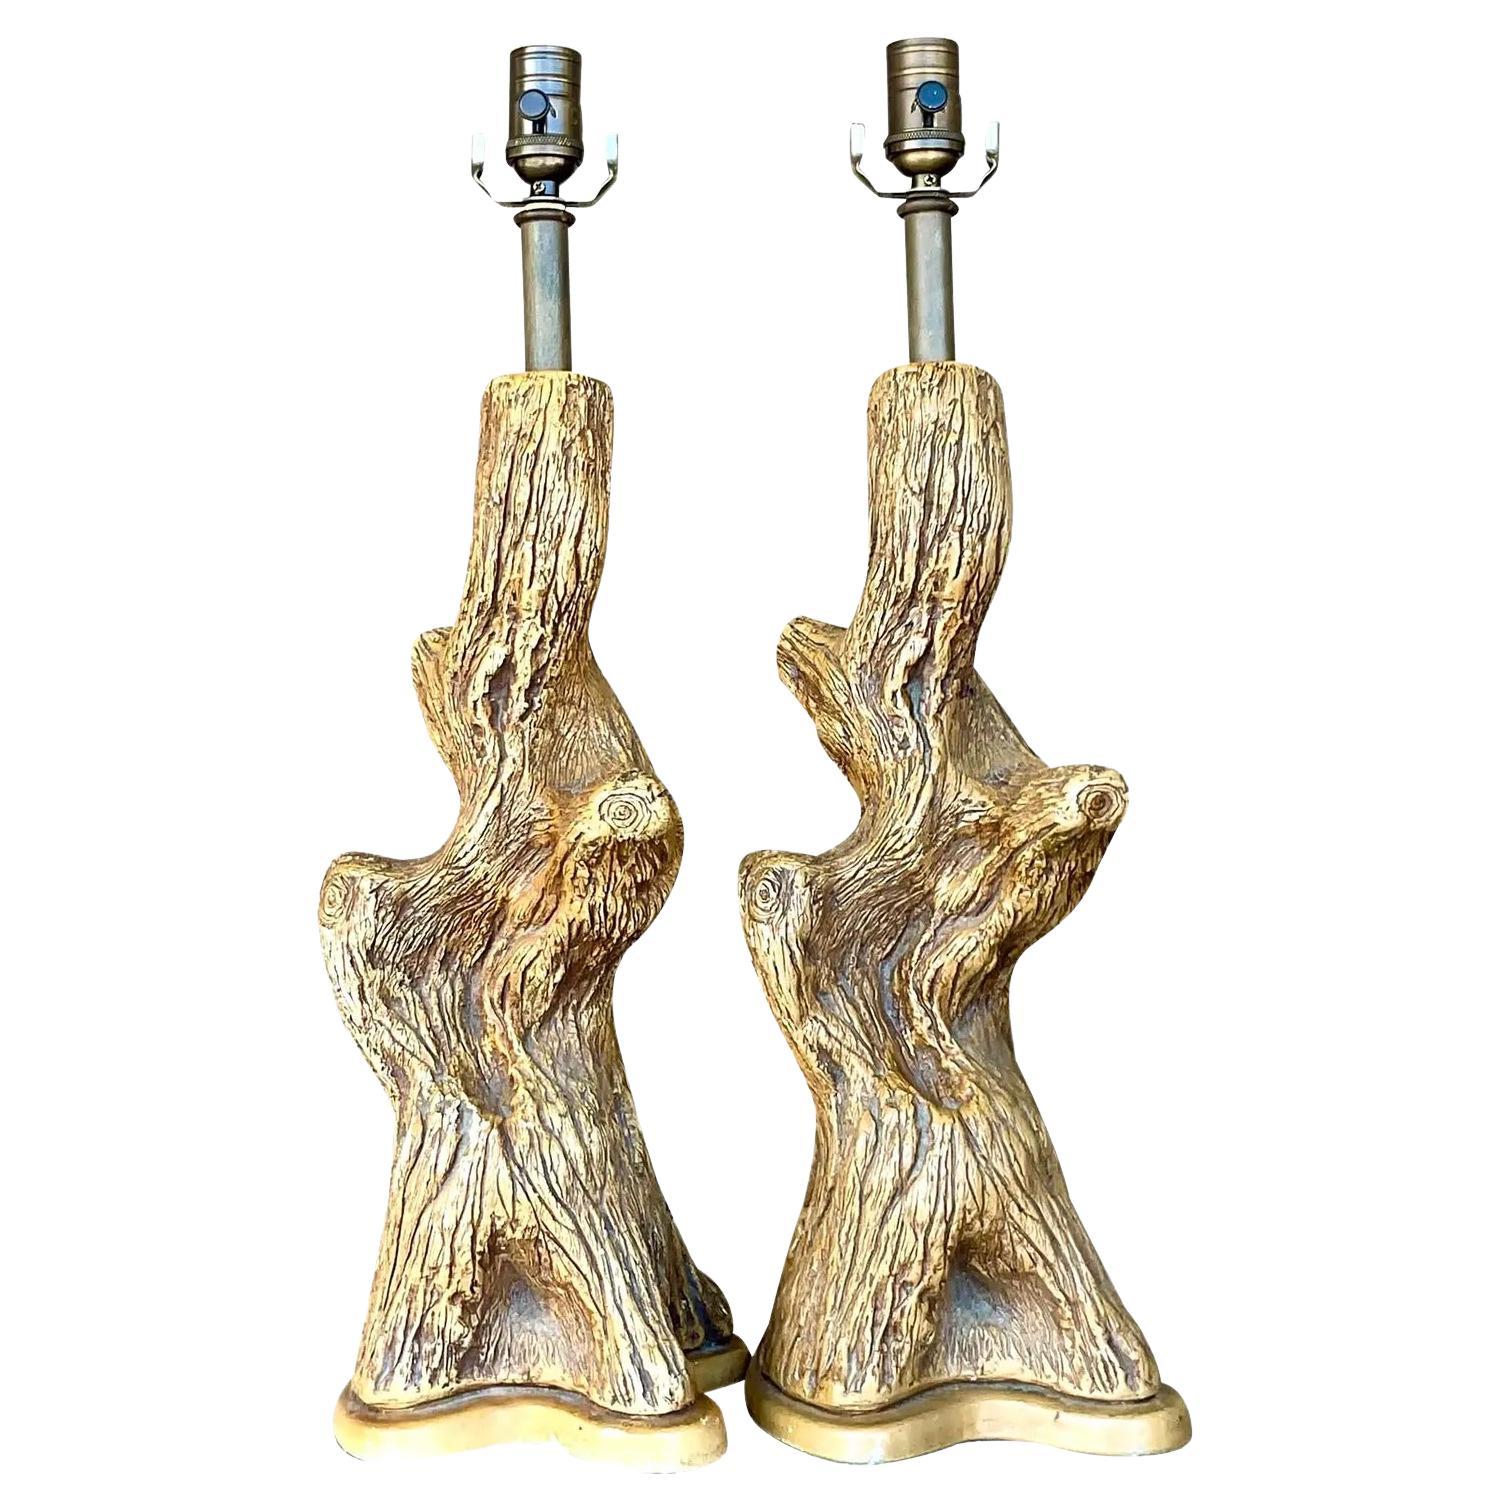 Vintage Boho Painted Plaster Tree Trunk Lamps - a Pair For Sale